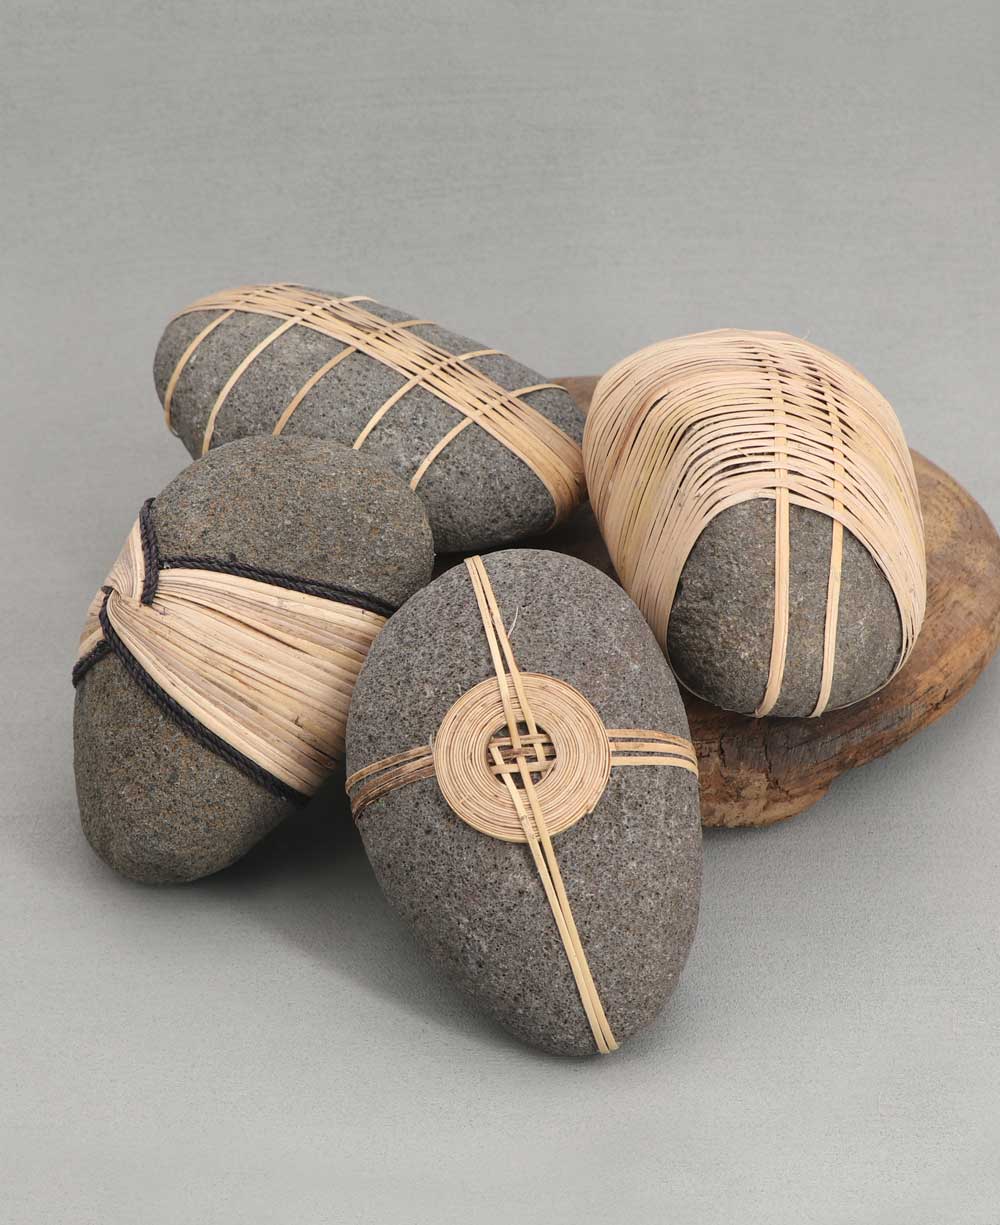 Decorative Zen Rocks With Rattan, Sold Individually - Home A